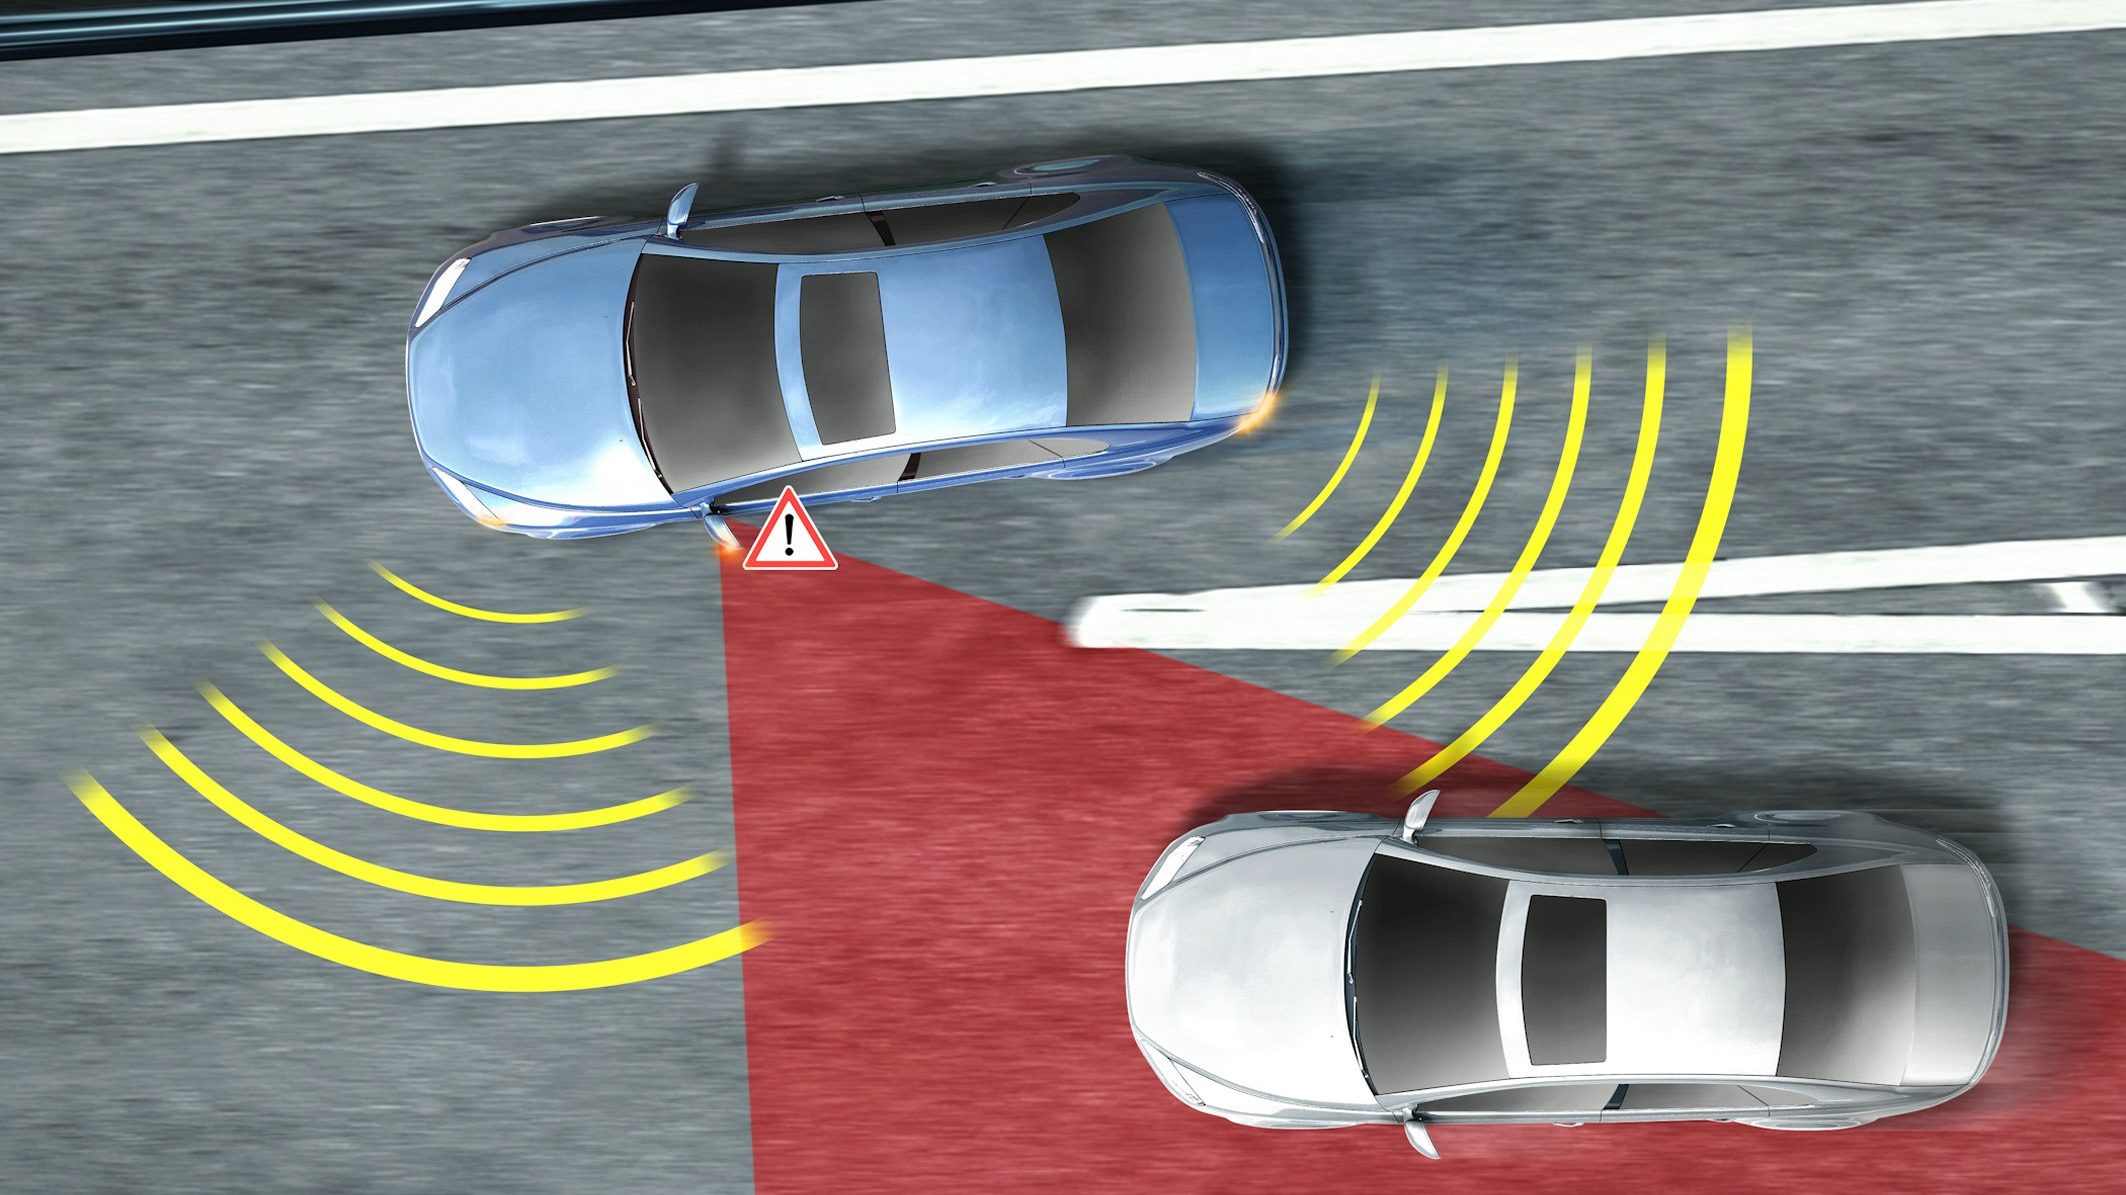 What is the blind spot when driving?